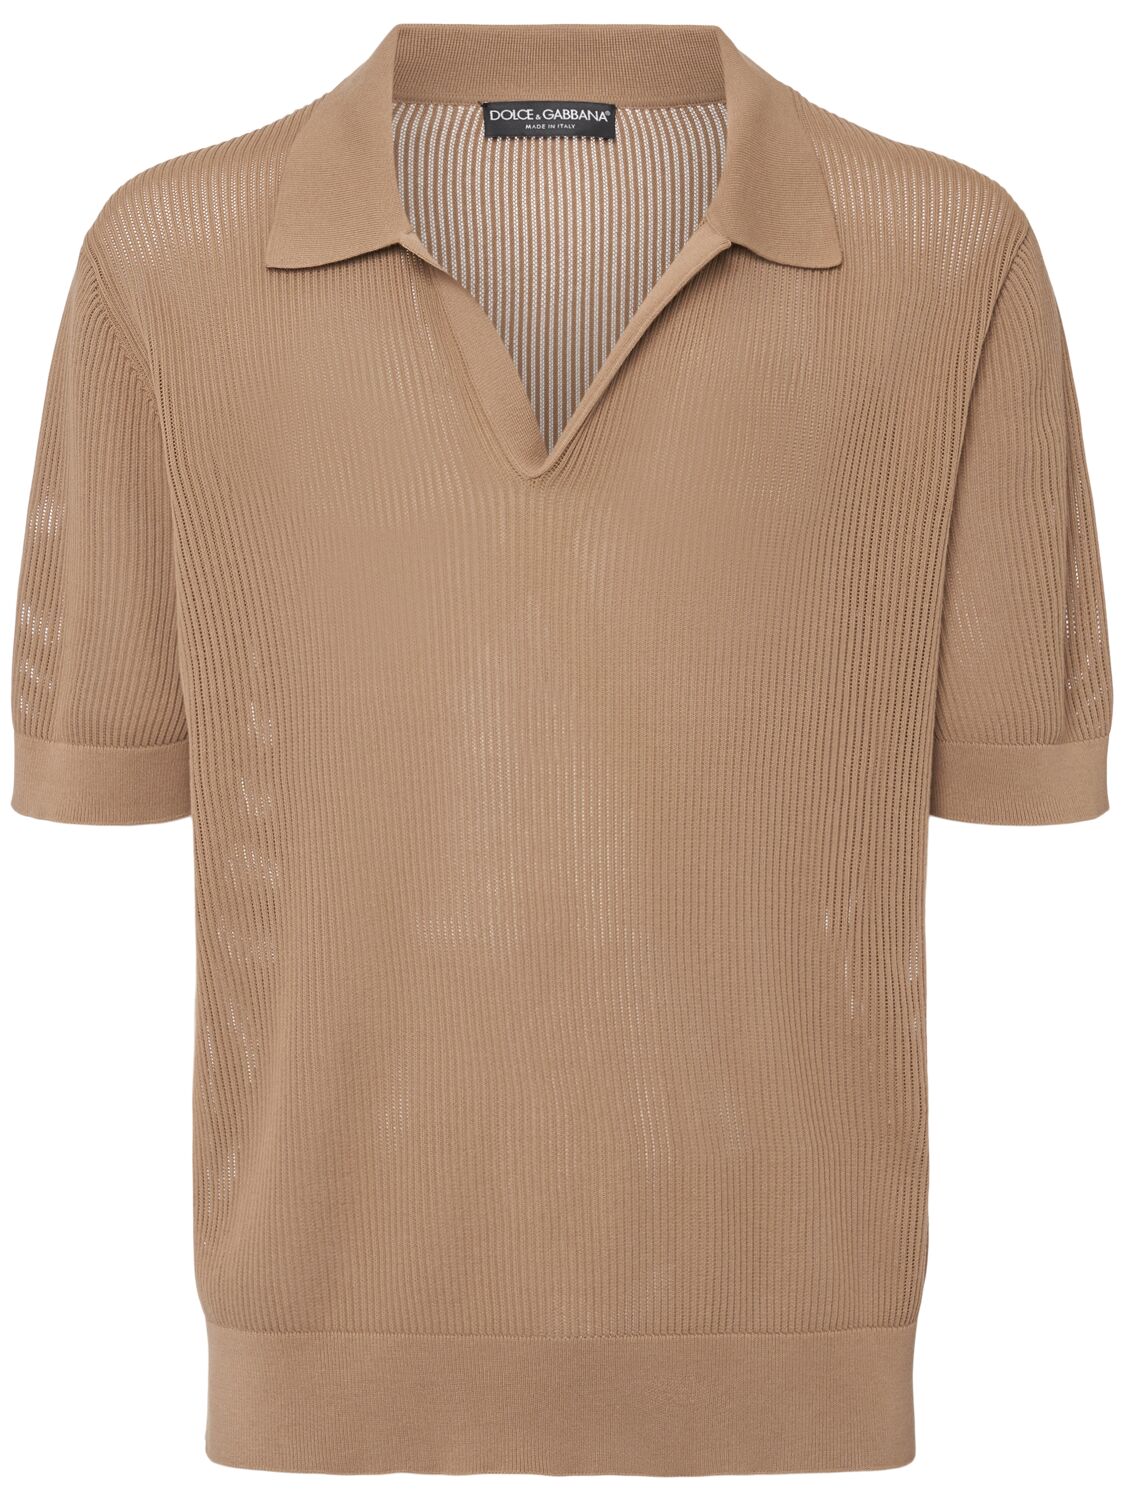 Dolce & Gabbana Cotton Knit Polo In Brown